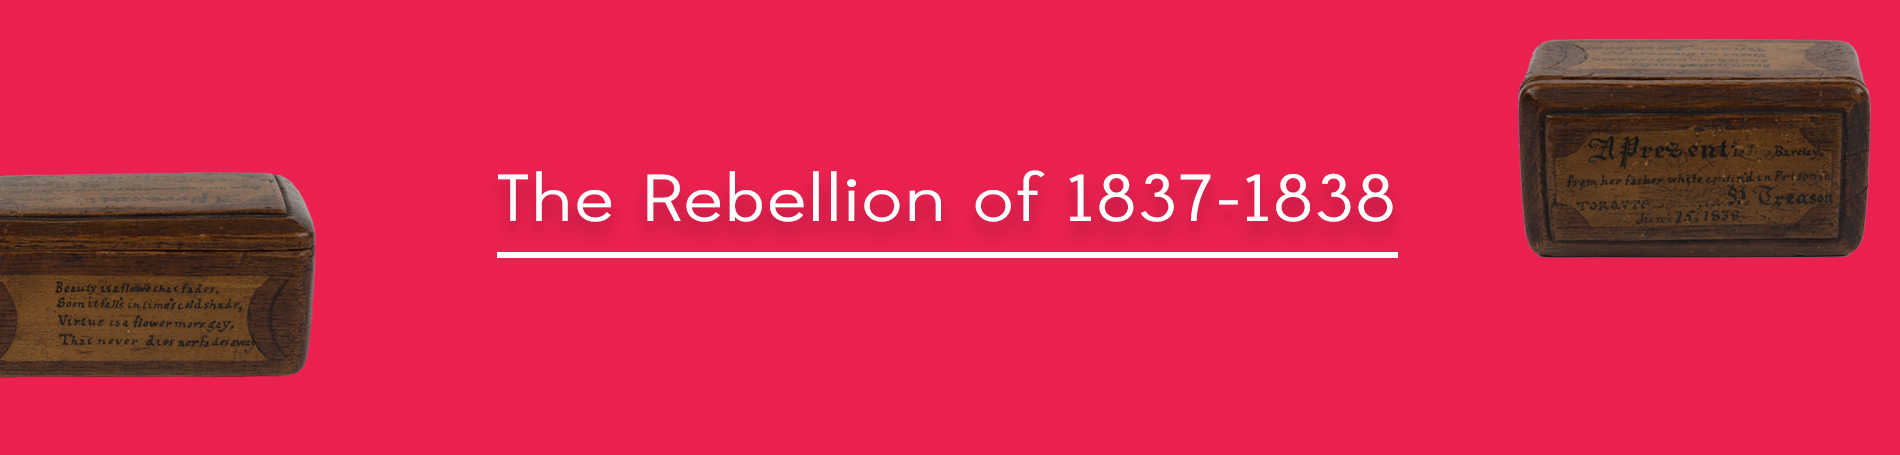 Red background with text in center that reads "The Rebellion of 1837-1838". In the bottom left and top right corners are different sides of a carved wooden box.